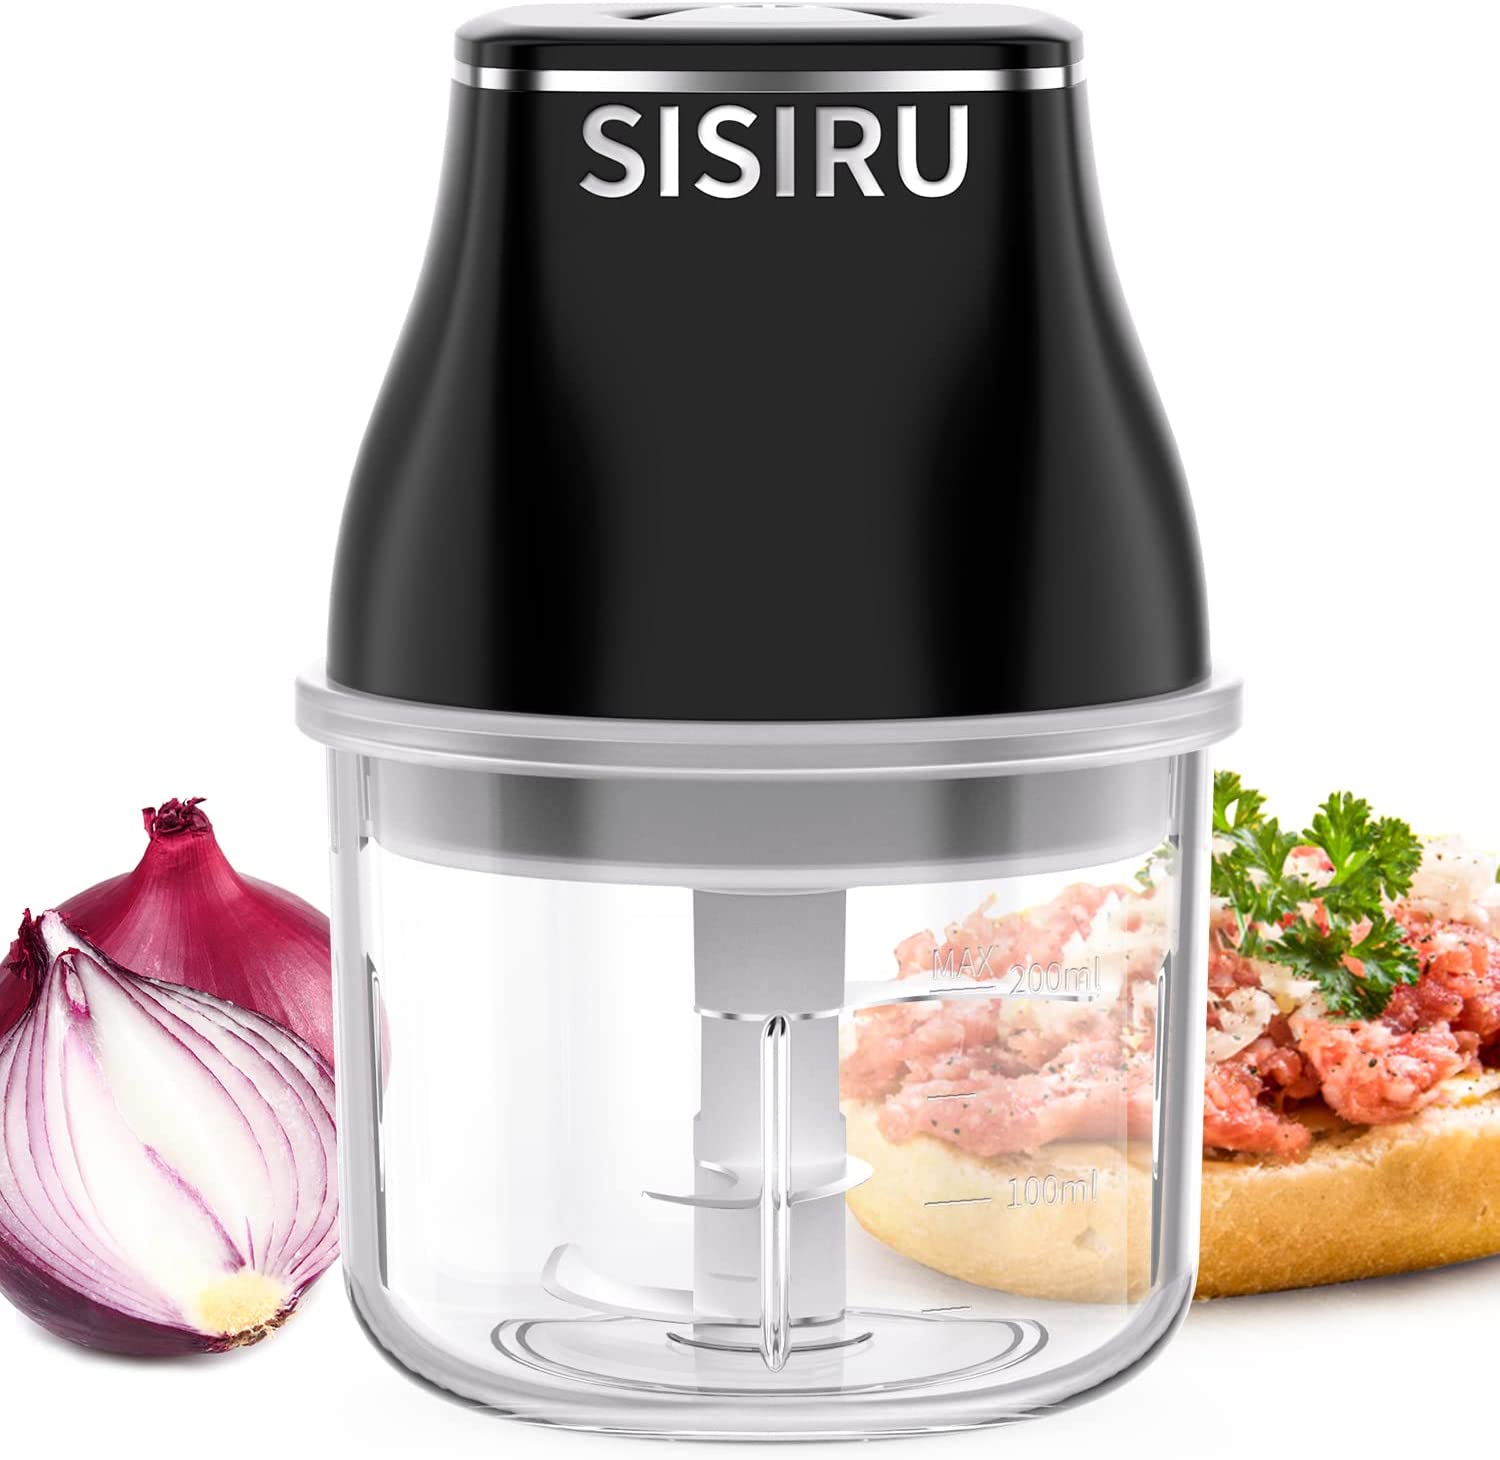 Sisiru Mini Chopper Electric Onion Chopper, USB Rechargeable Garlic Chopper 200 ml with 3 Stainless Steel Blades, Suitable for Meat, Vegetables, Garlic, Ginger and Baby Food, Black